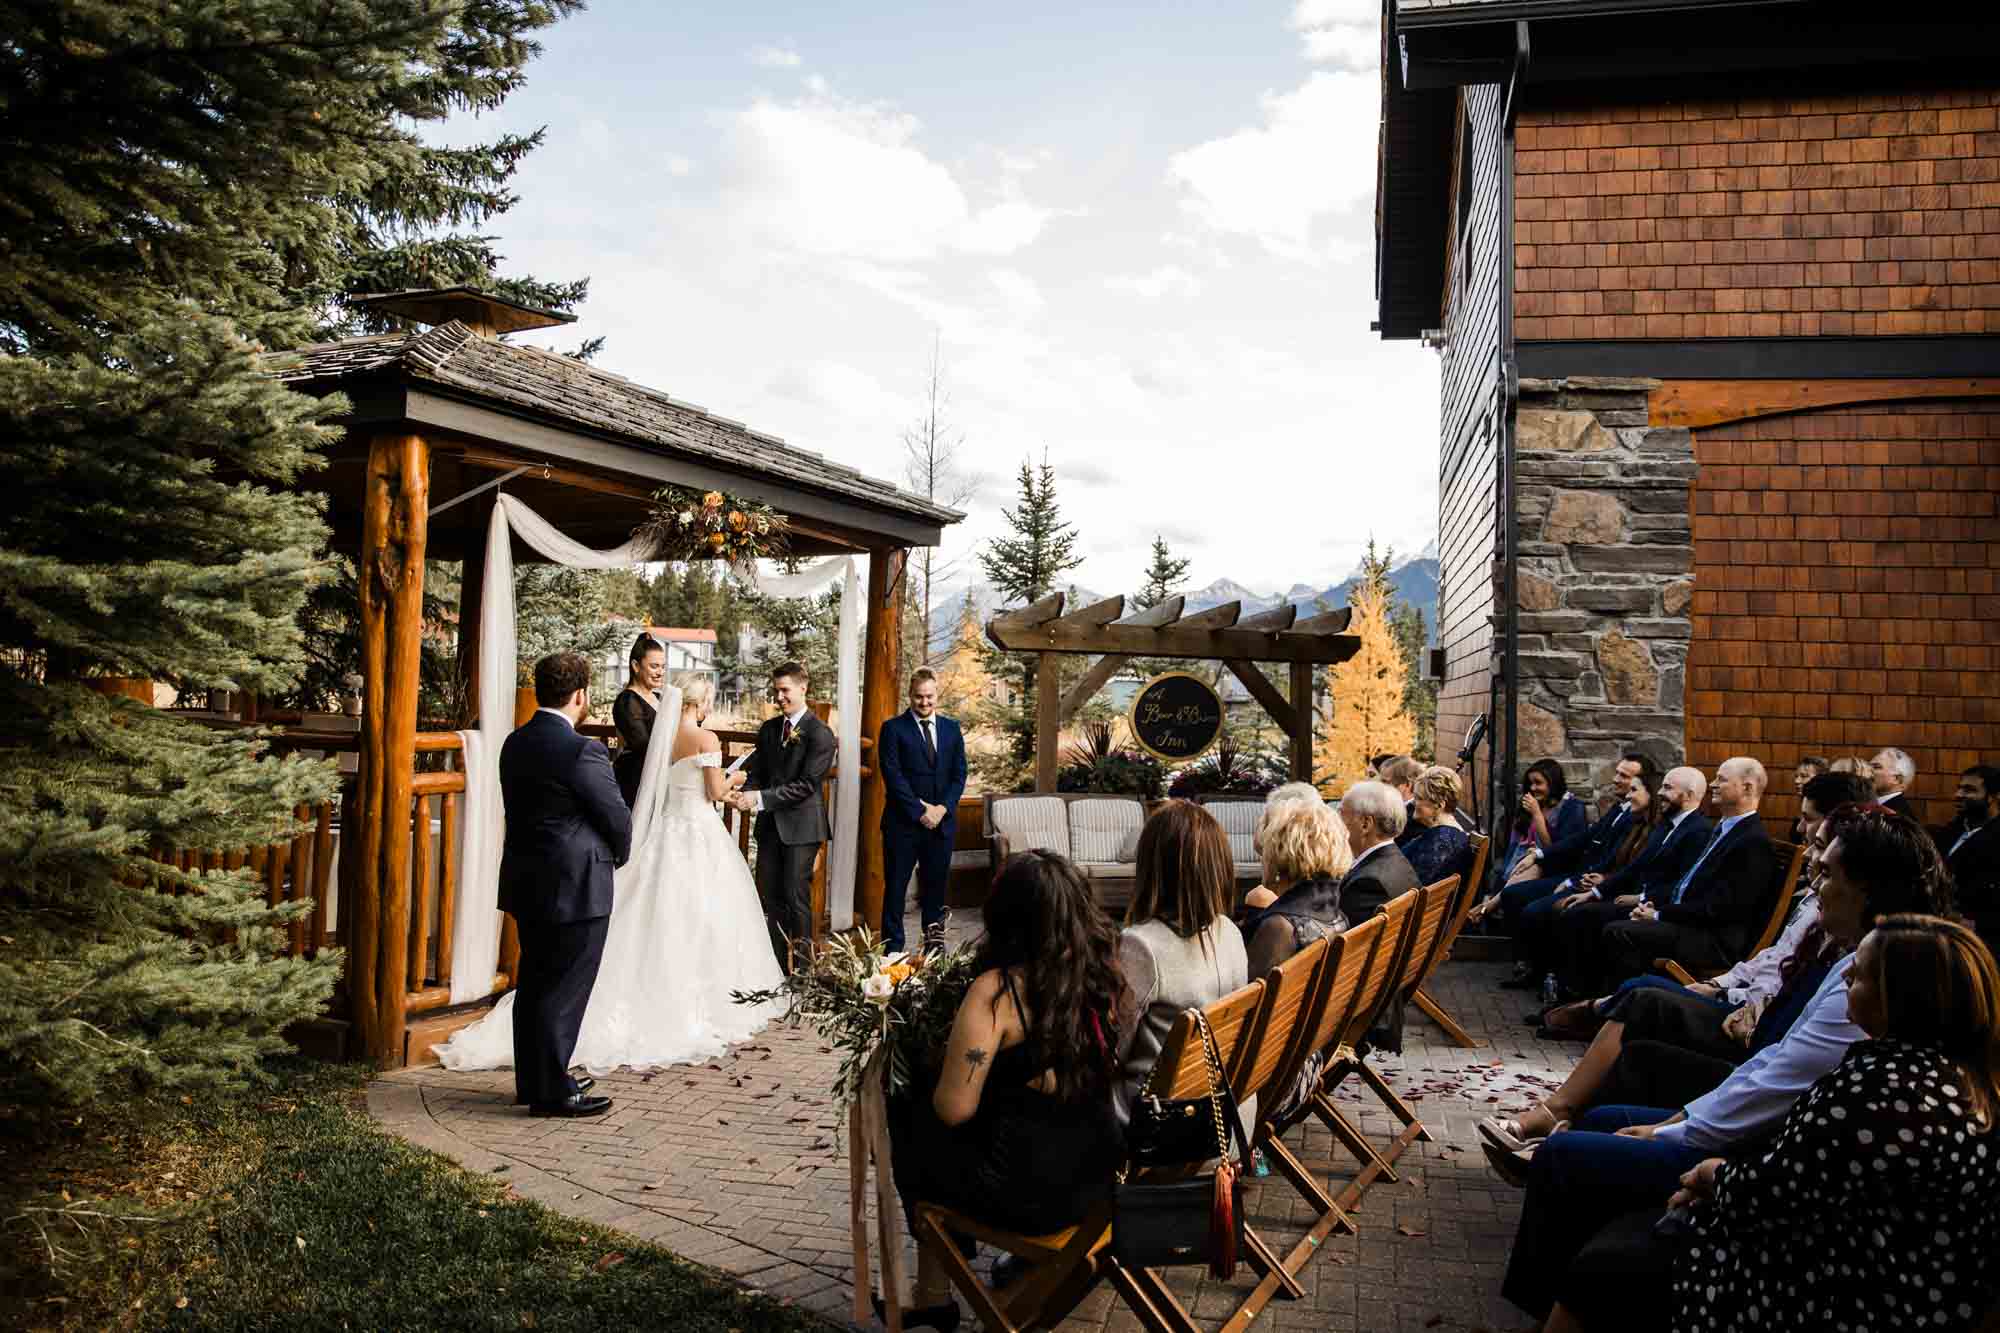 Calgary and Canmore wedding photographer, photography during a wedding at the Bear and Bison Inn in Canmore in the mountains